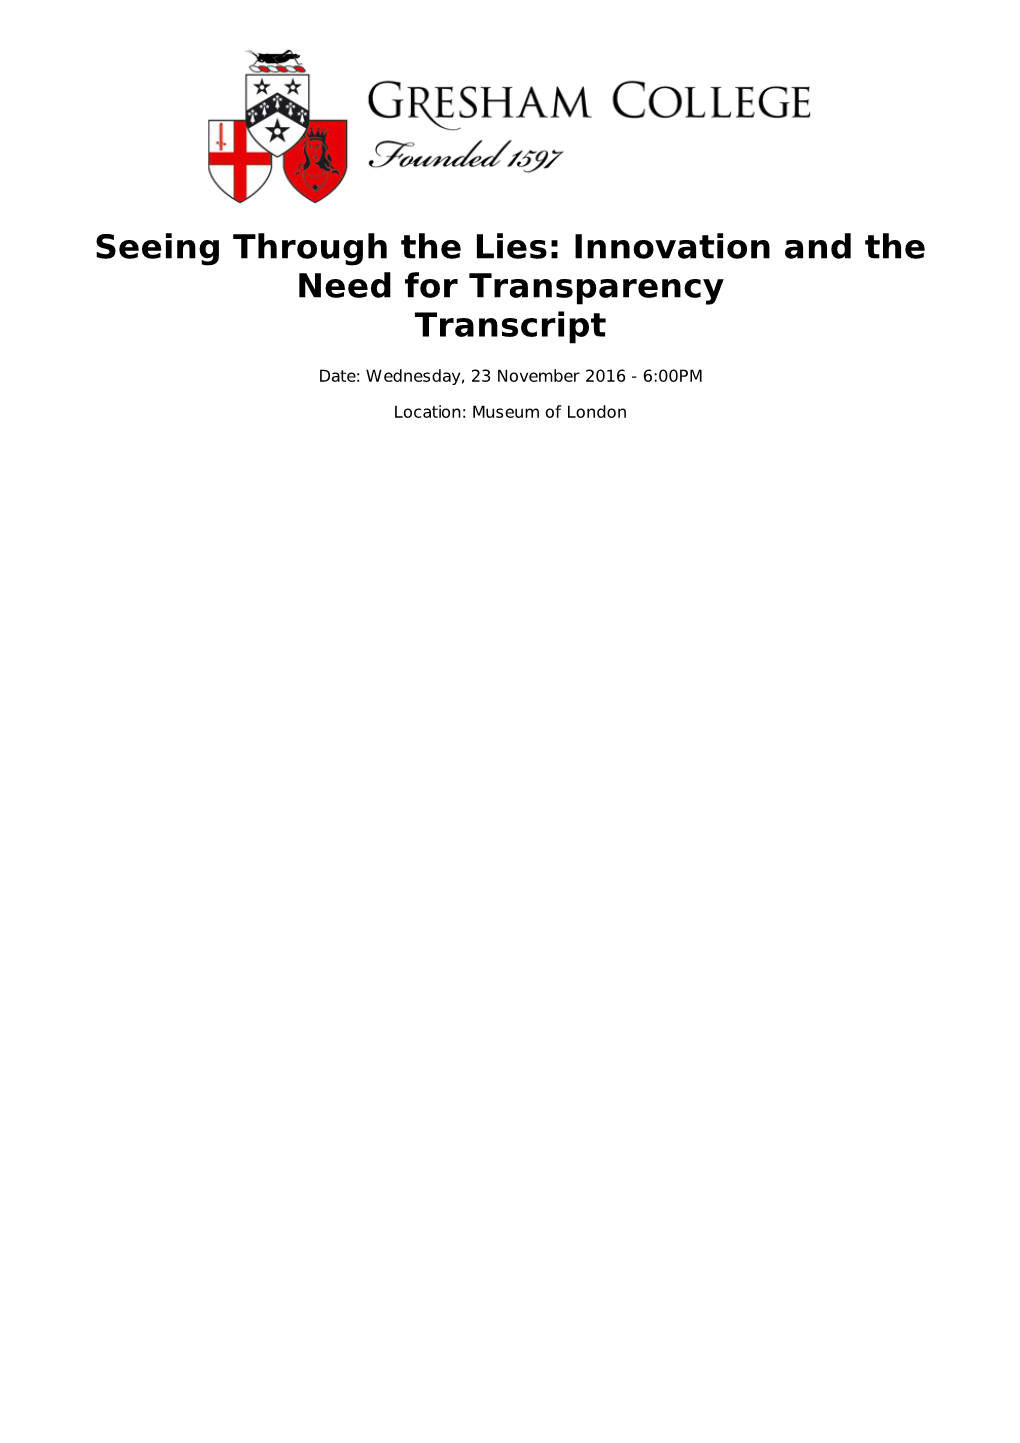 Seeing Through the Lies: Innovation and the Need for Transparency Transcript